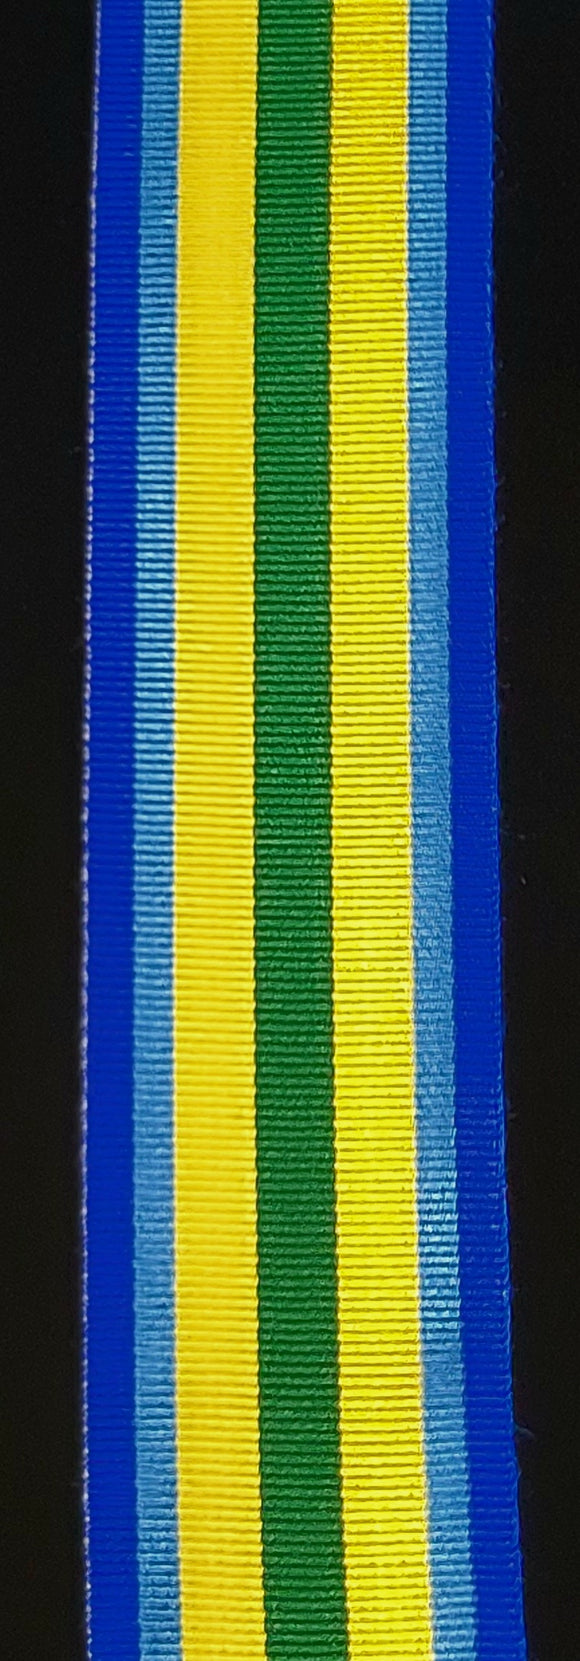 Ribbon, Canadian Peace Officer Exemplary Service Medal